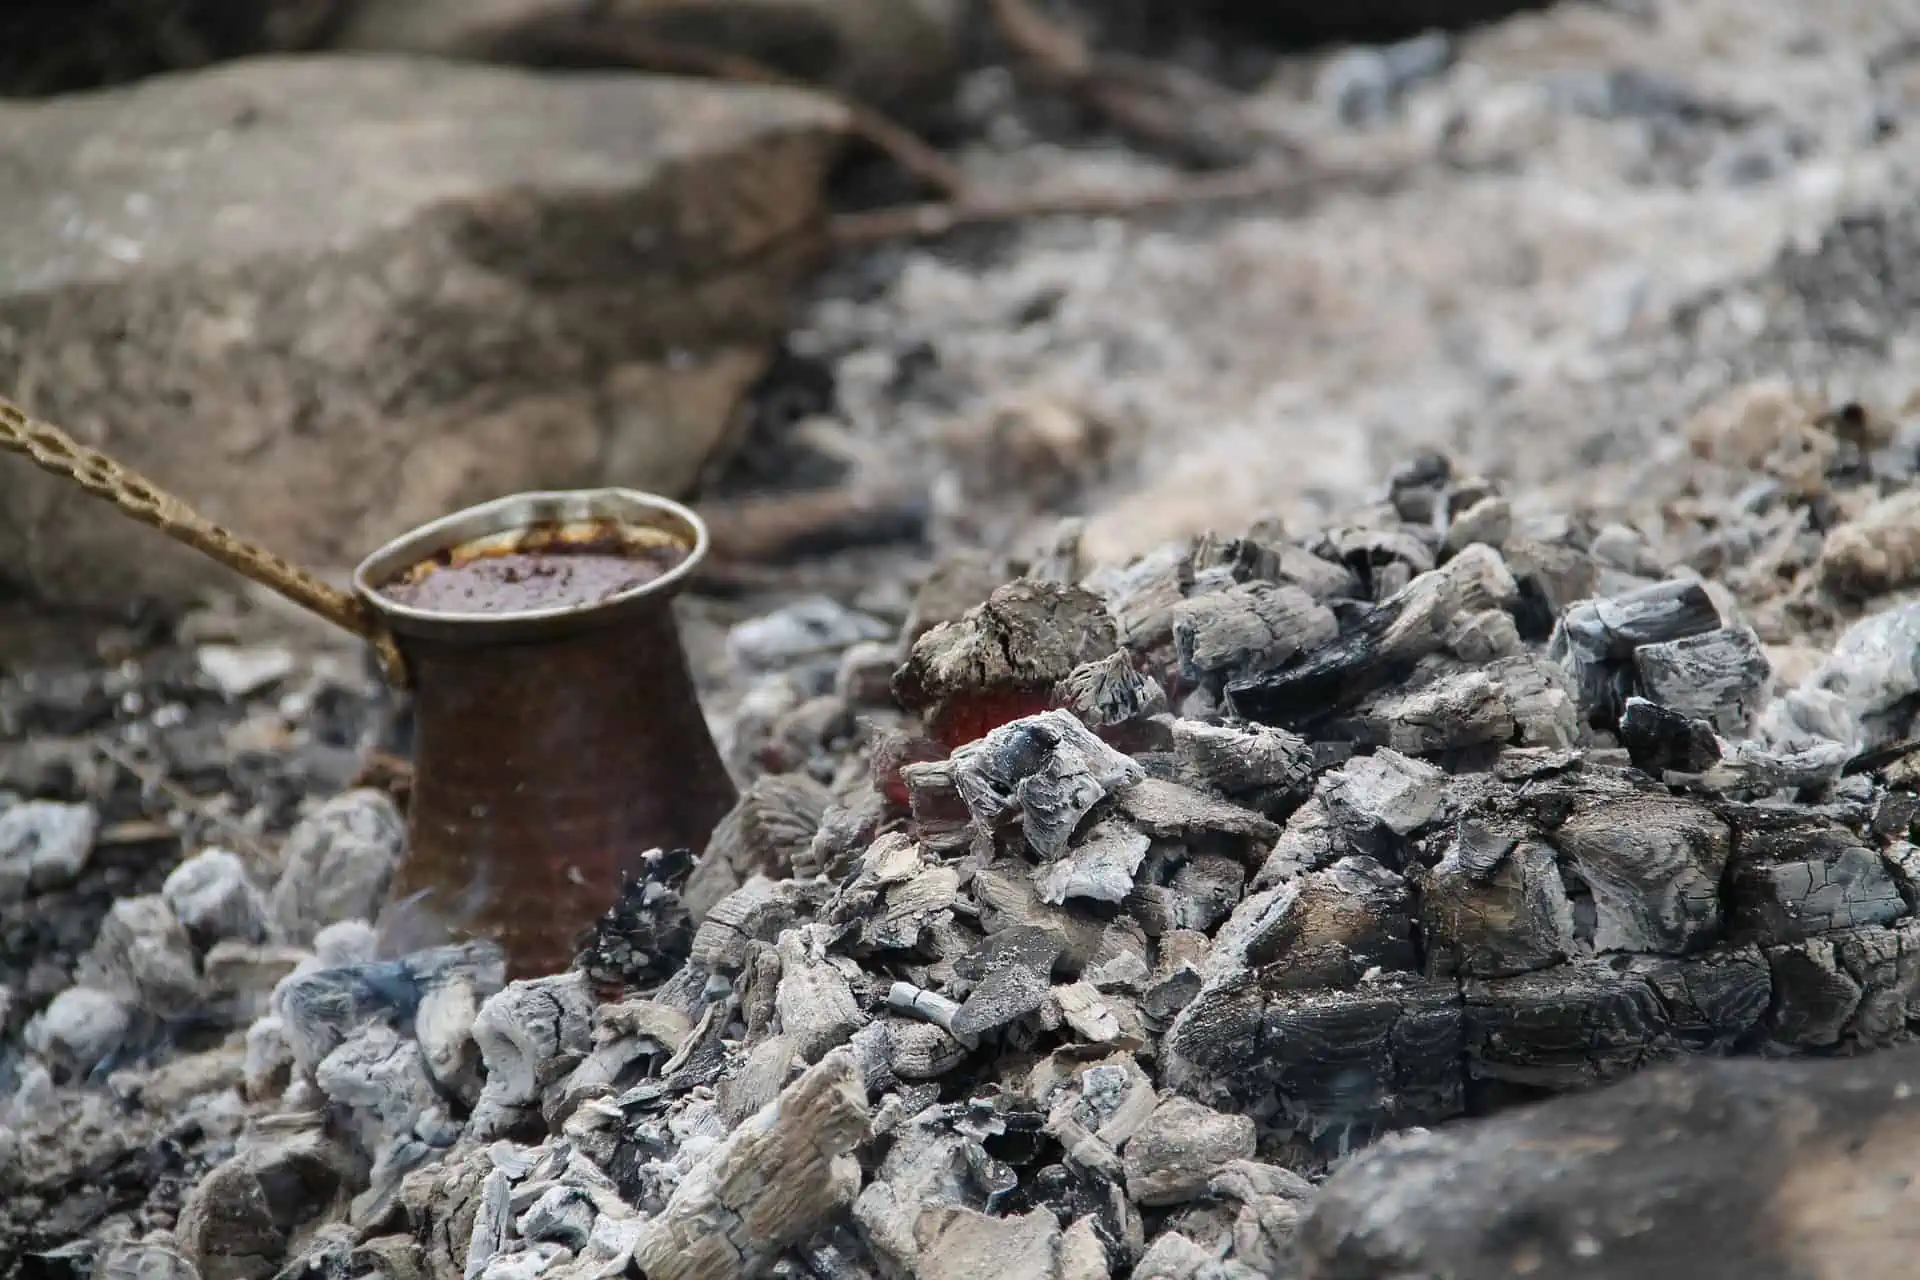 Turkish coffee brewed in the embers